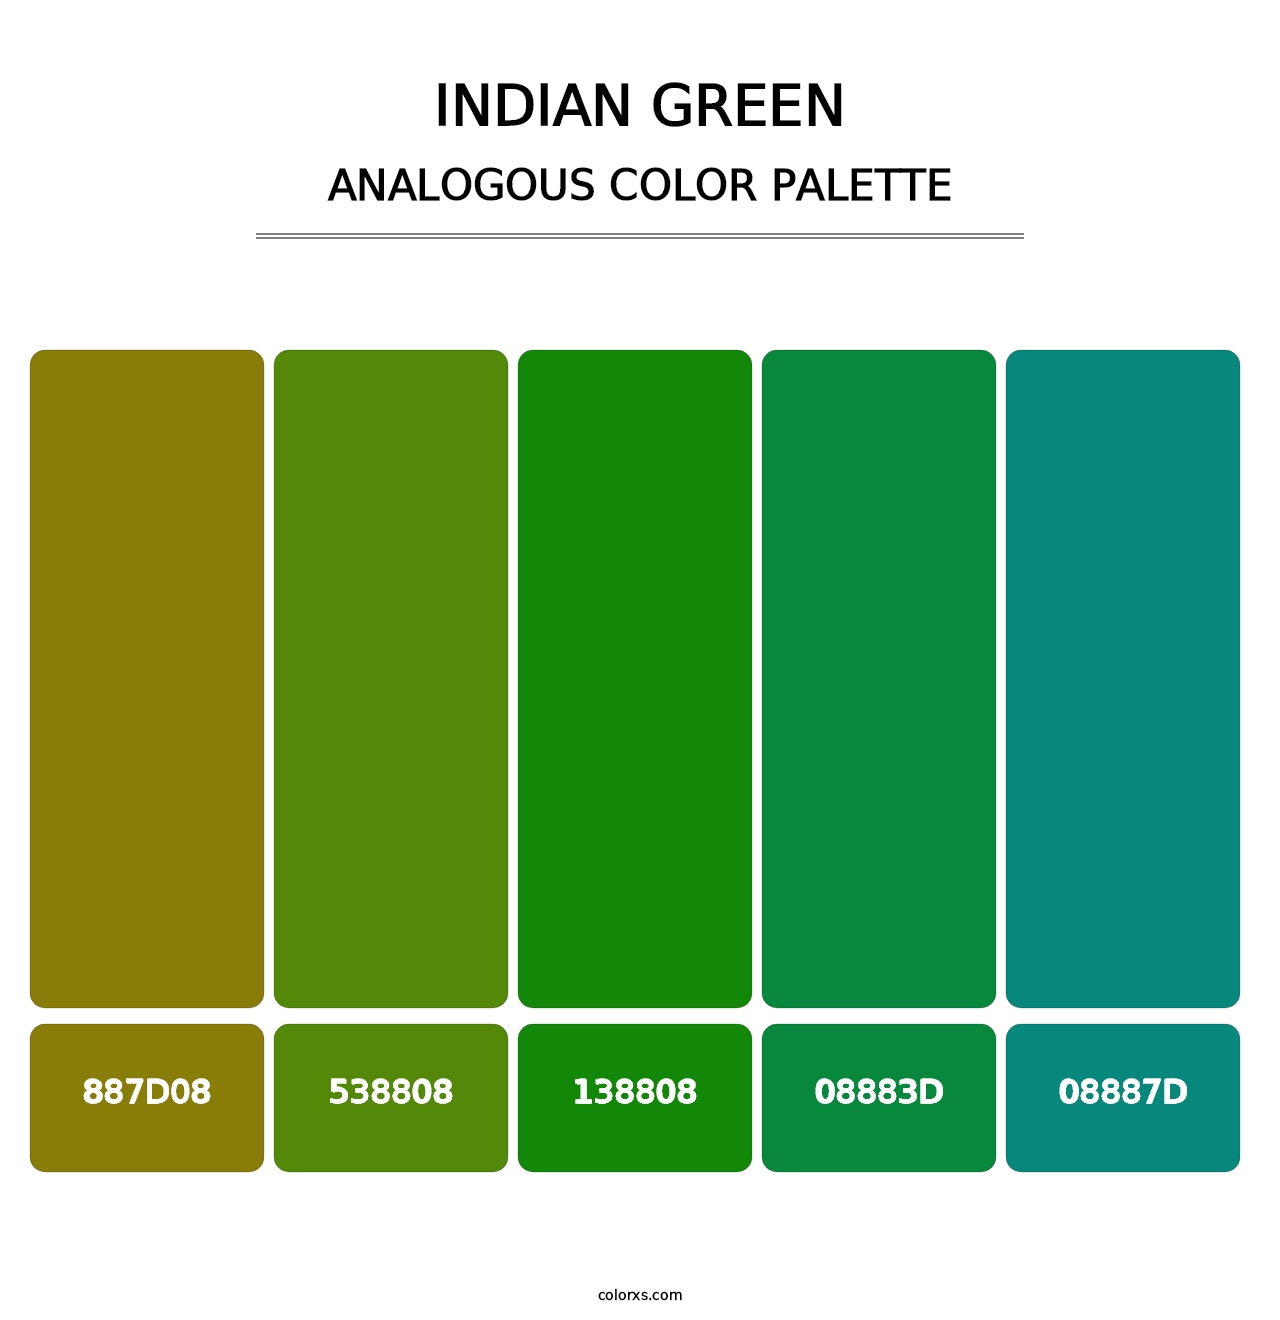 Indian Green - Analogous Color Palette